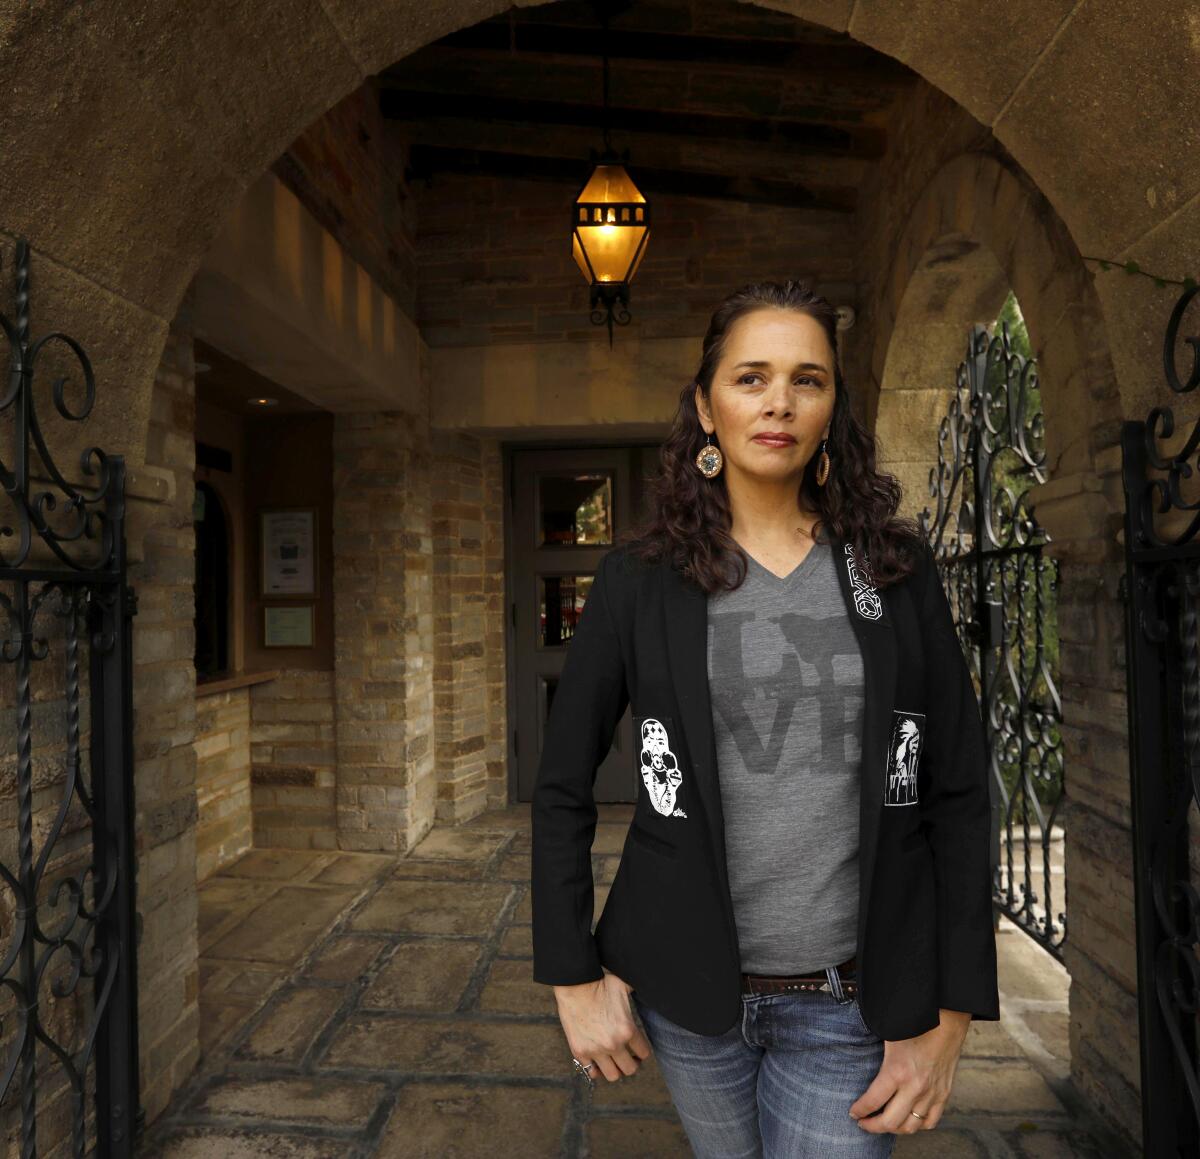 Larissa Fasthorse, wearing a grey t-shirt and a black blazer over jeans, is framed by a colonnade